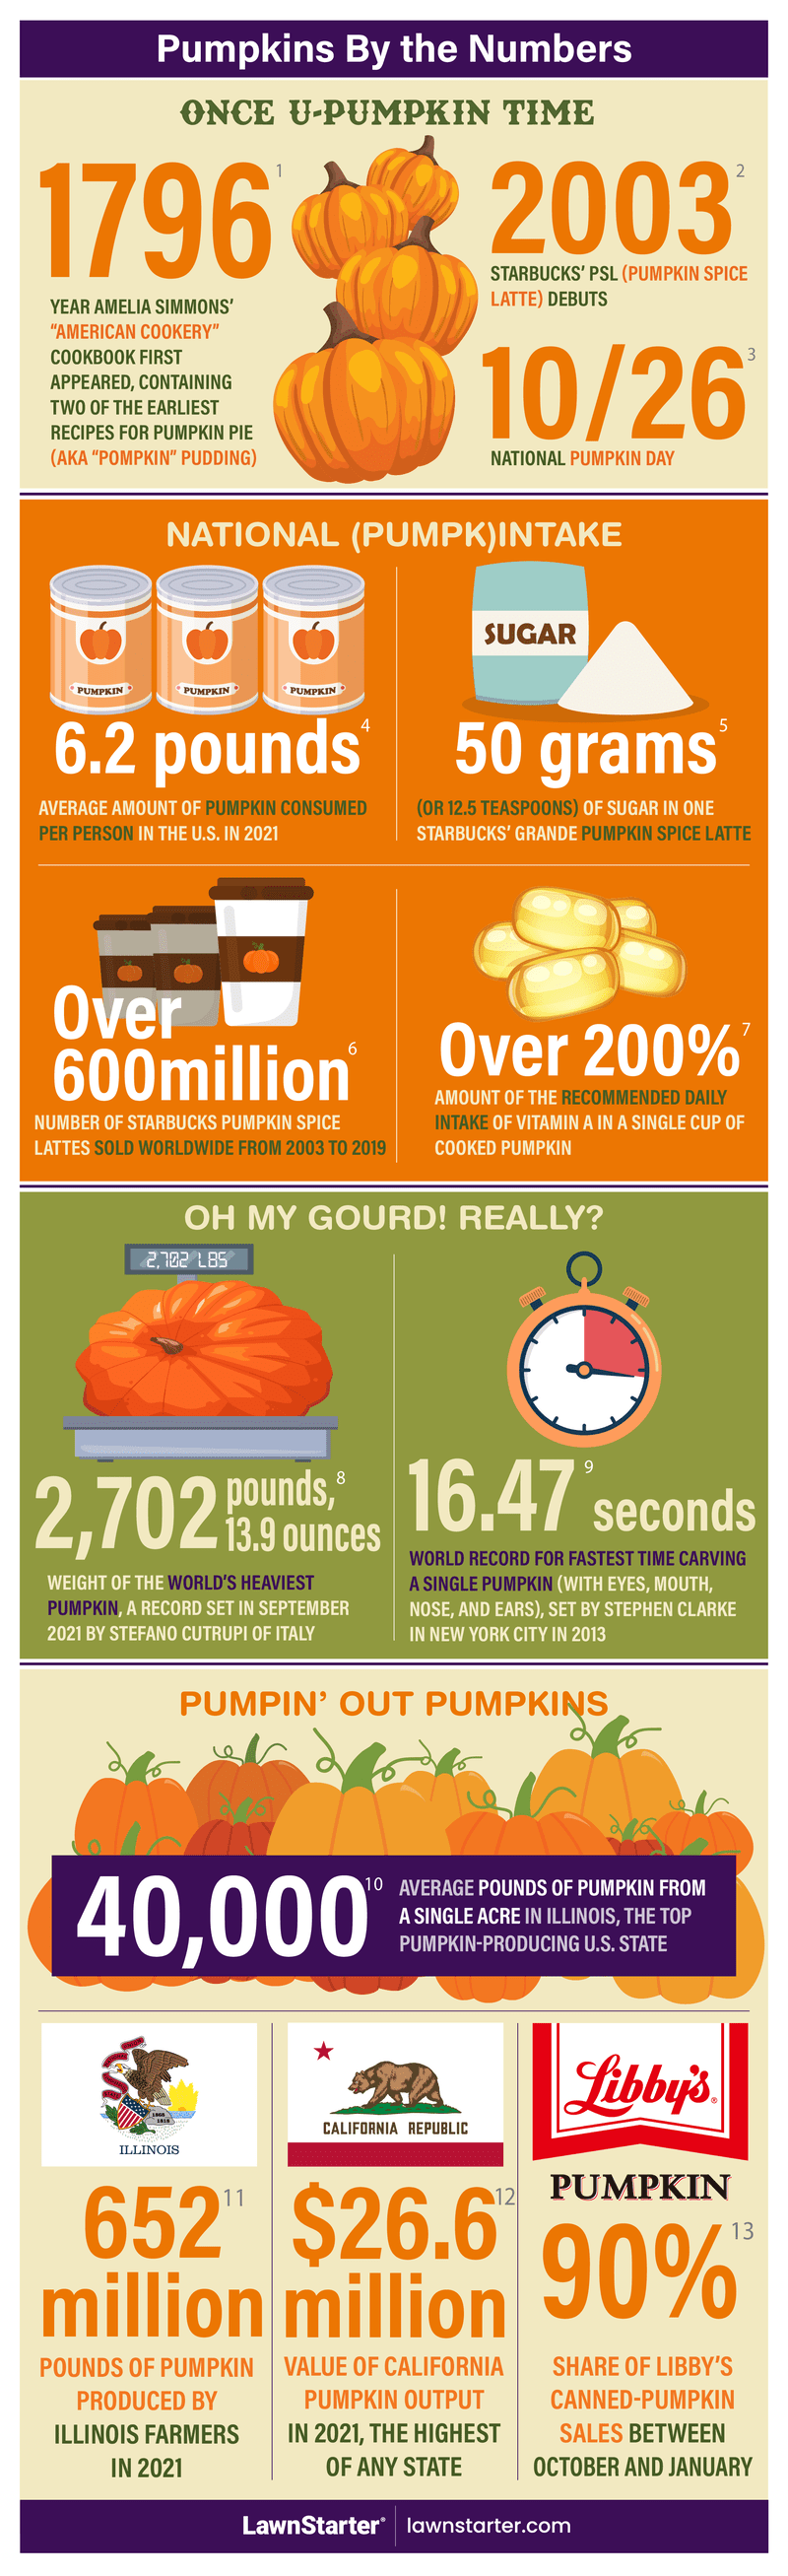 Infographic showing the various pumpkin-related stats about pumpkin history, U.S. consumption, state pumpkin production, and more